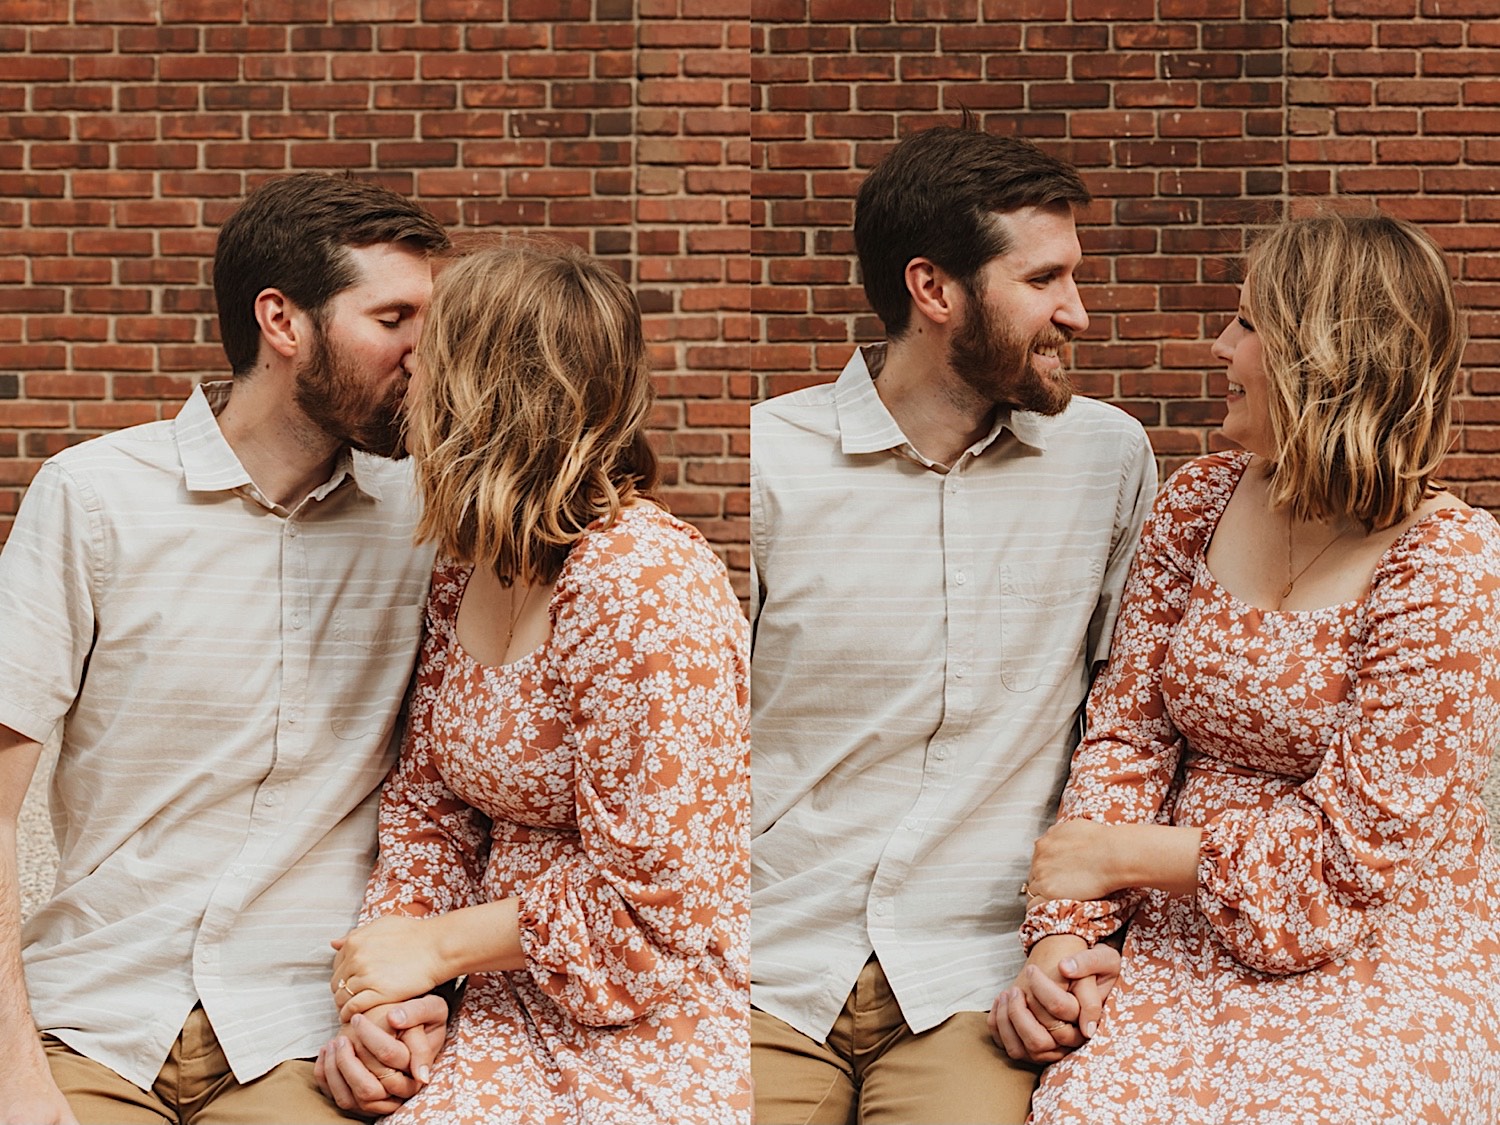 2 photos side by side of a couple in front of a brick wall, in the left photo they are kissing and in the right they are smiling at one another